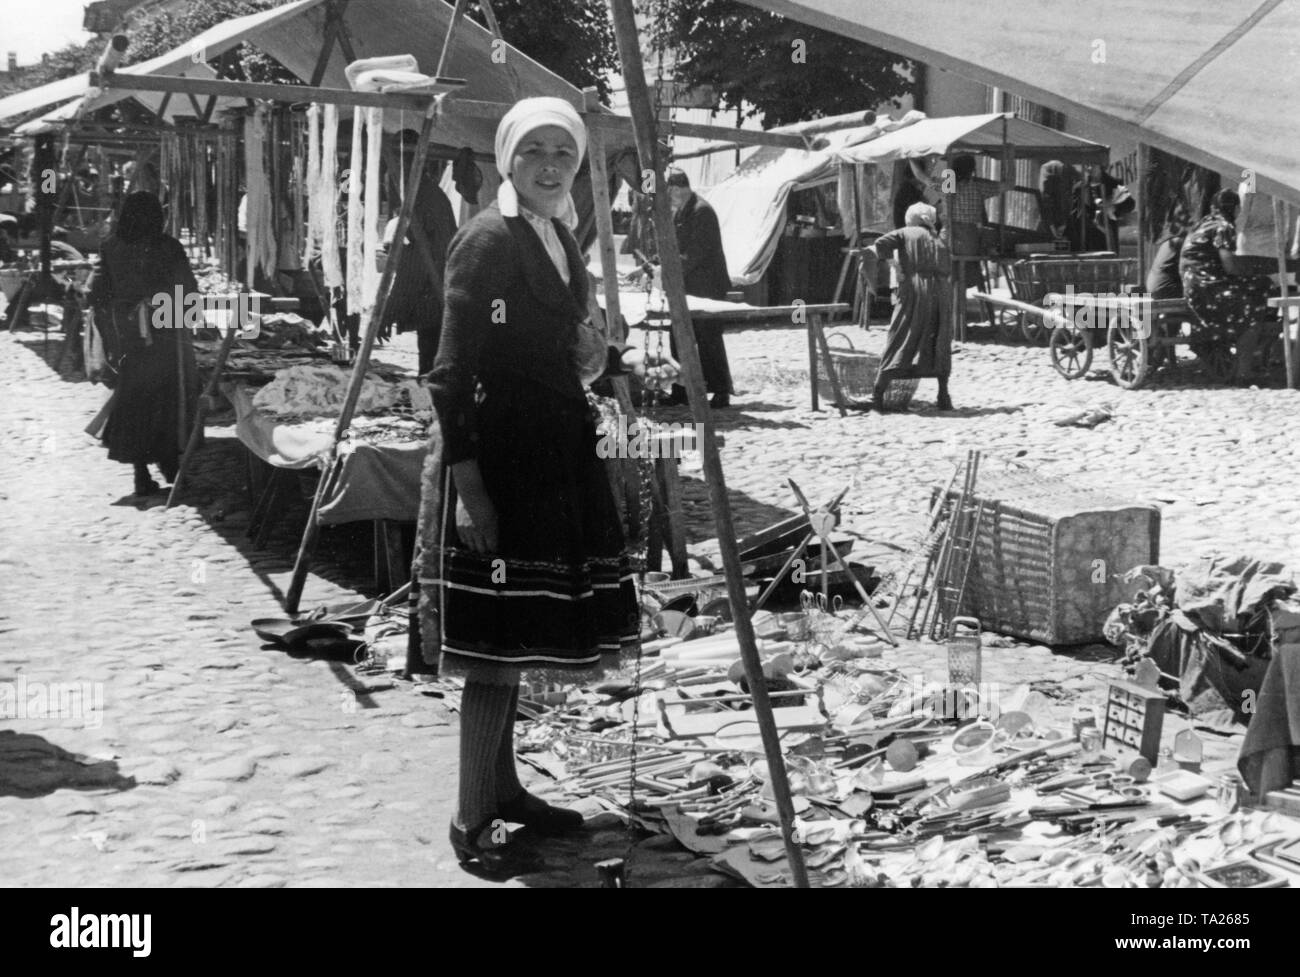 Market in a village in the Slovak region of Spis. In March 1939, the Slovak State became independent on the command of Adolf Hitler. The scene is from the Tobis documentary 'Zips'. Stock Photo